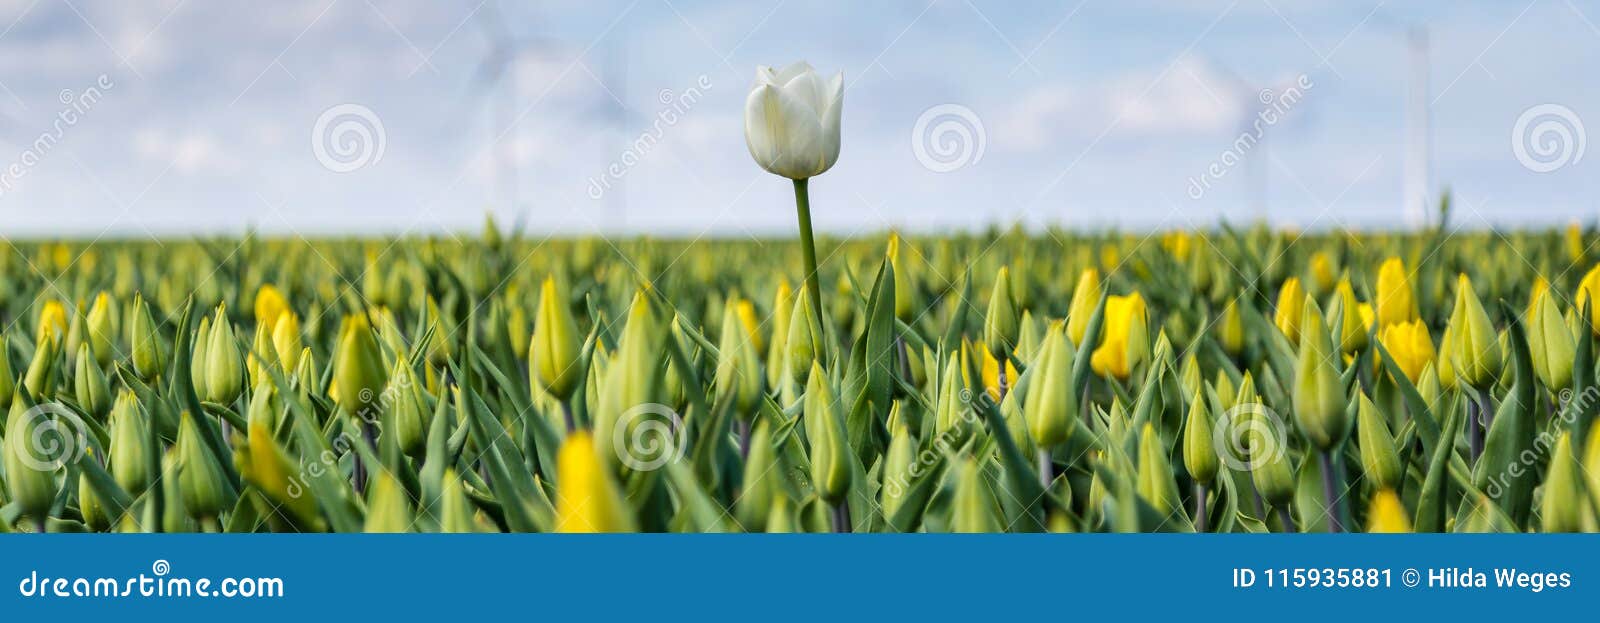 web banner with yellow tulips fields during springtime in the n